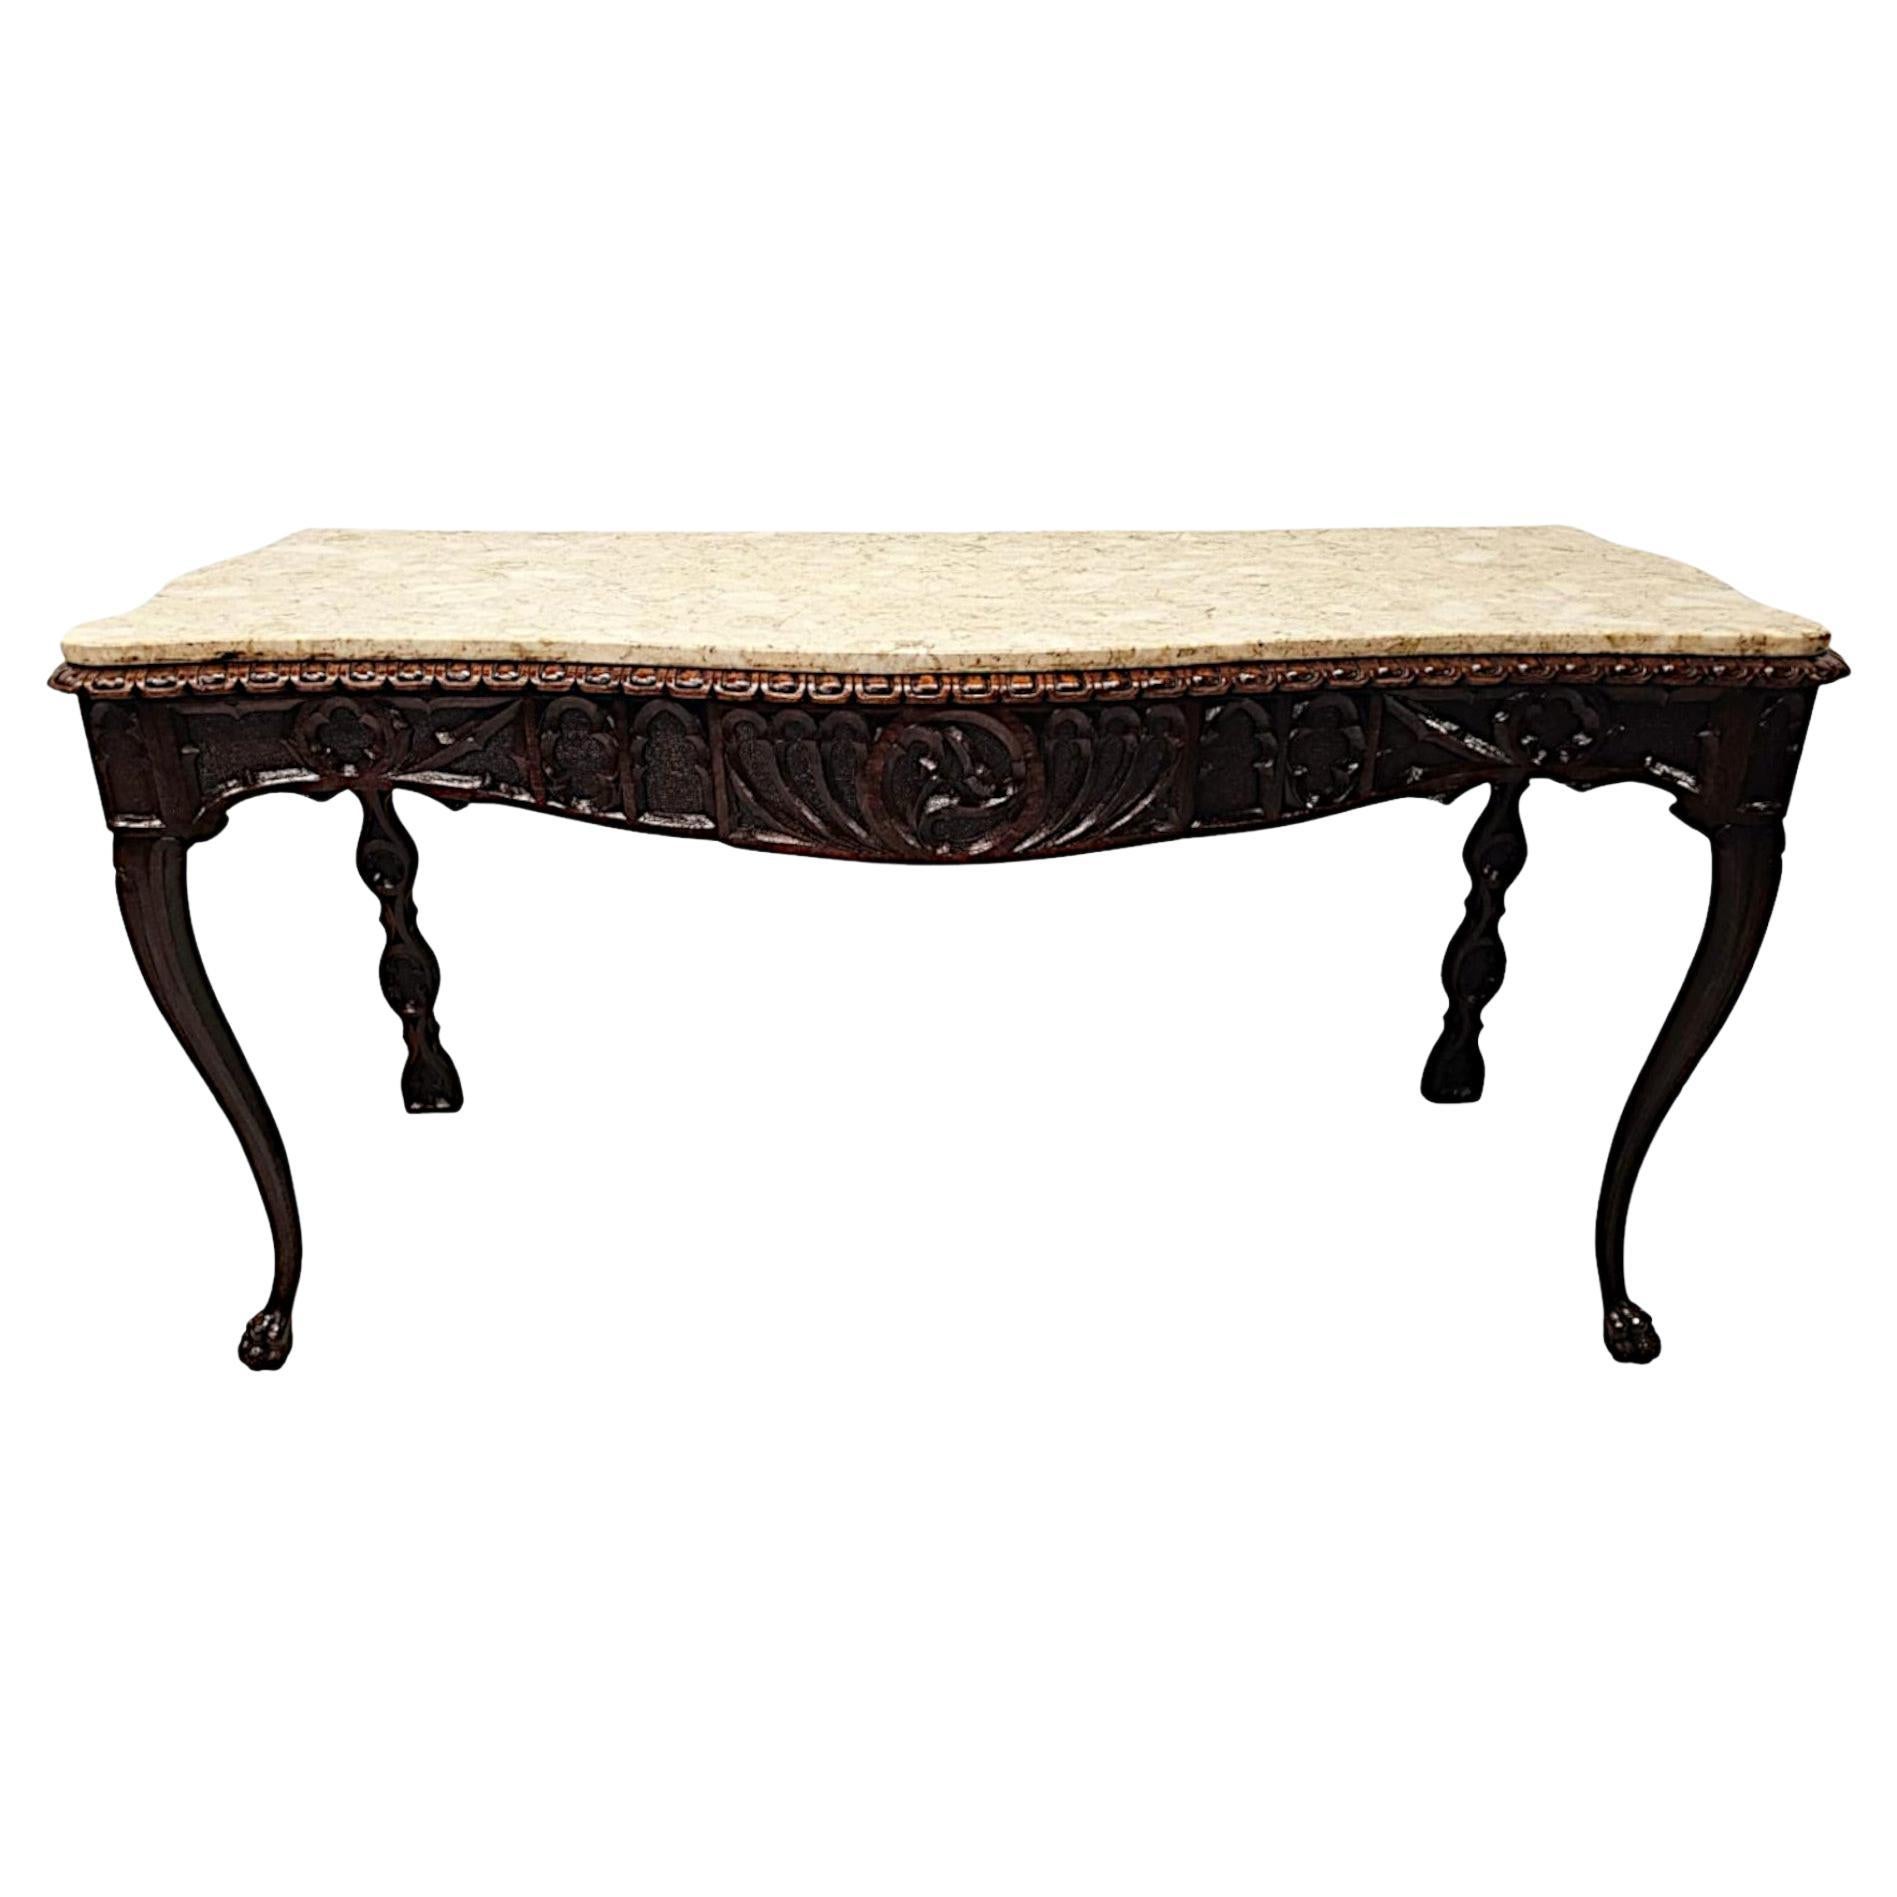  A Very Rare and Fine 19th Century Irish Gothic Hall or Console Table 